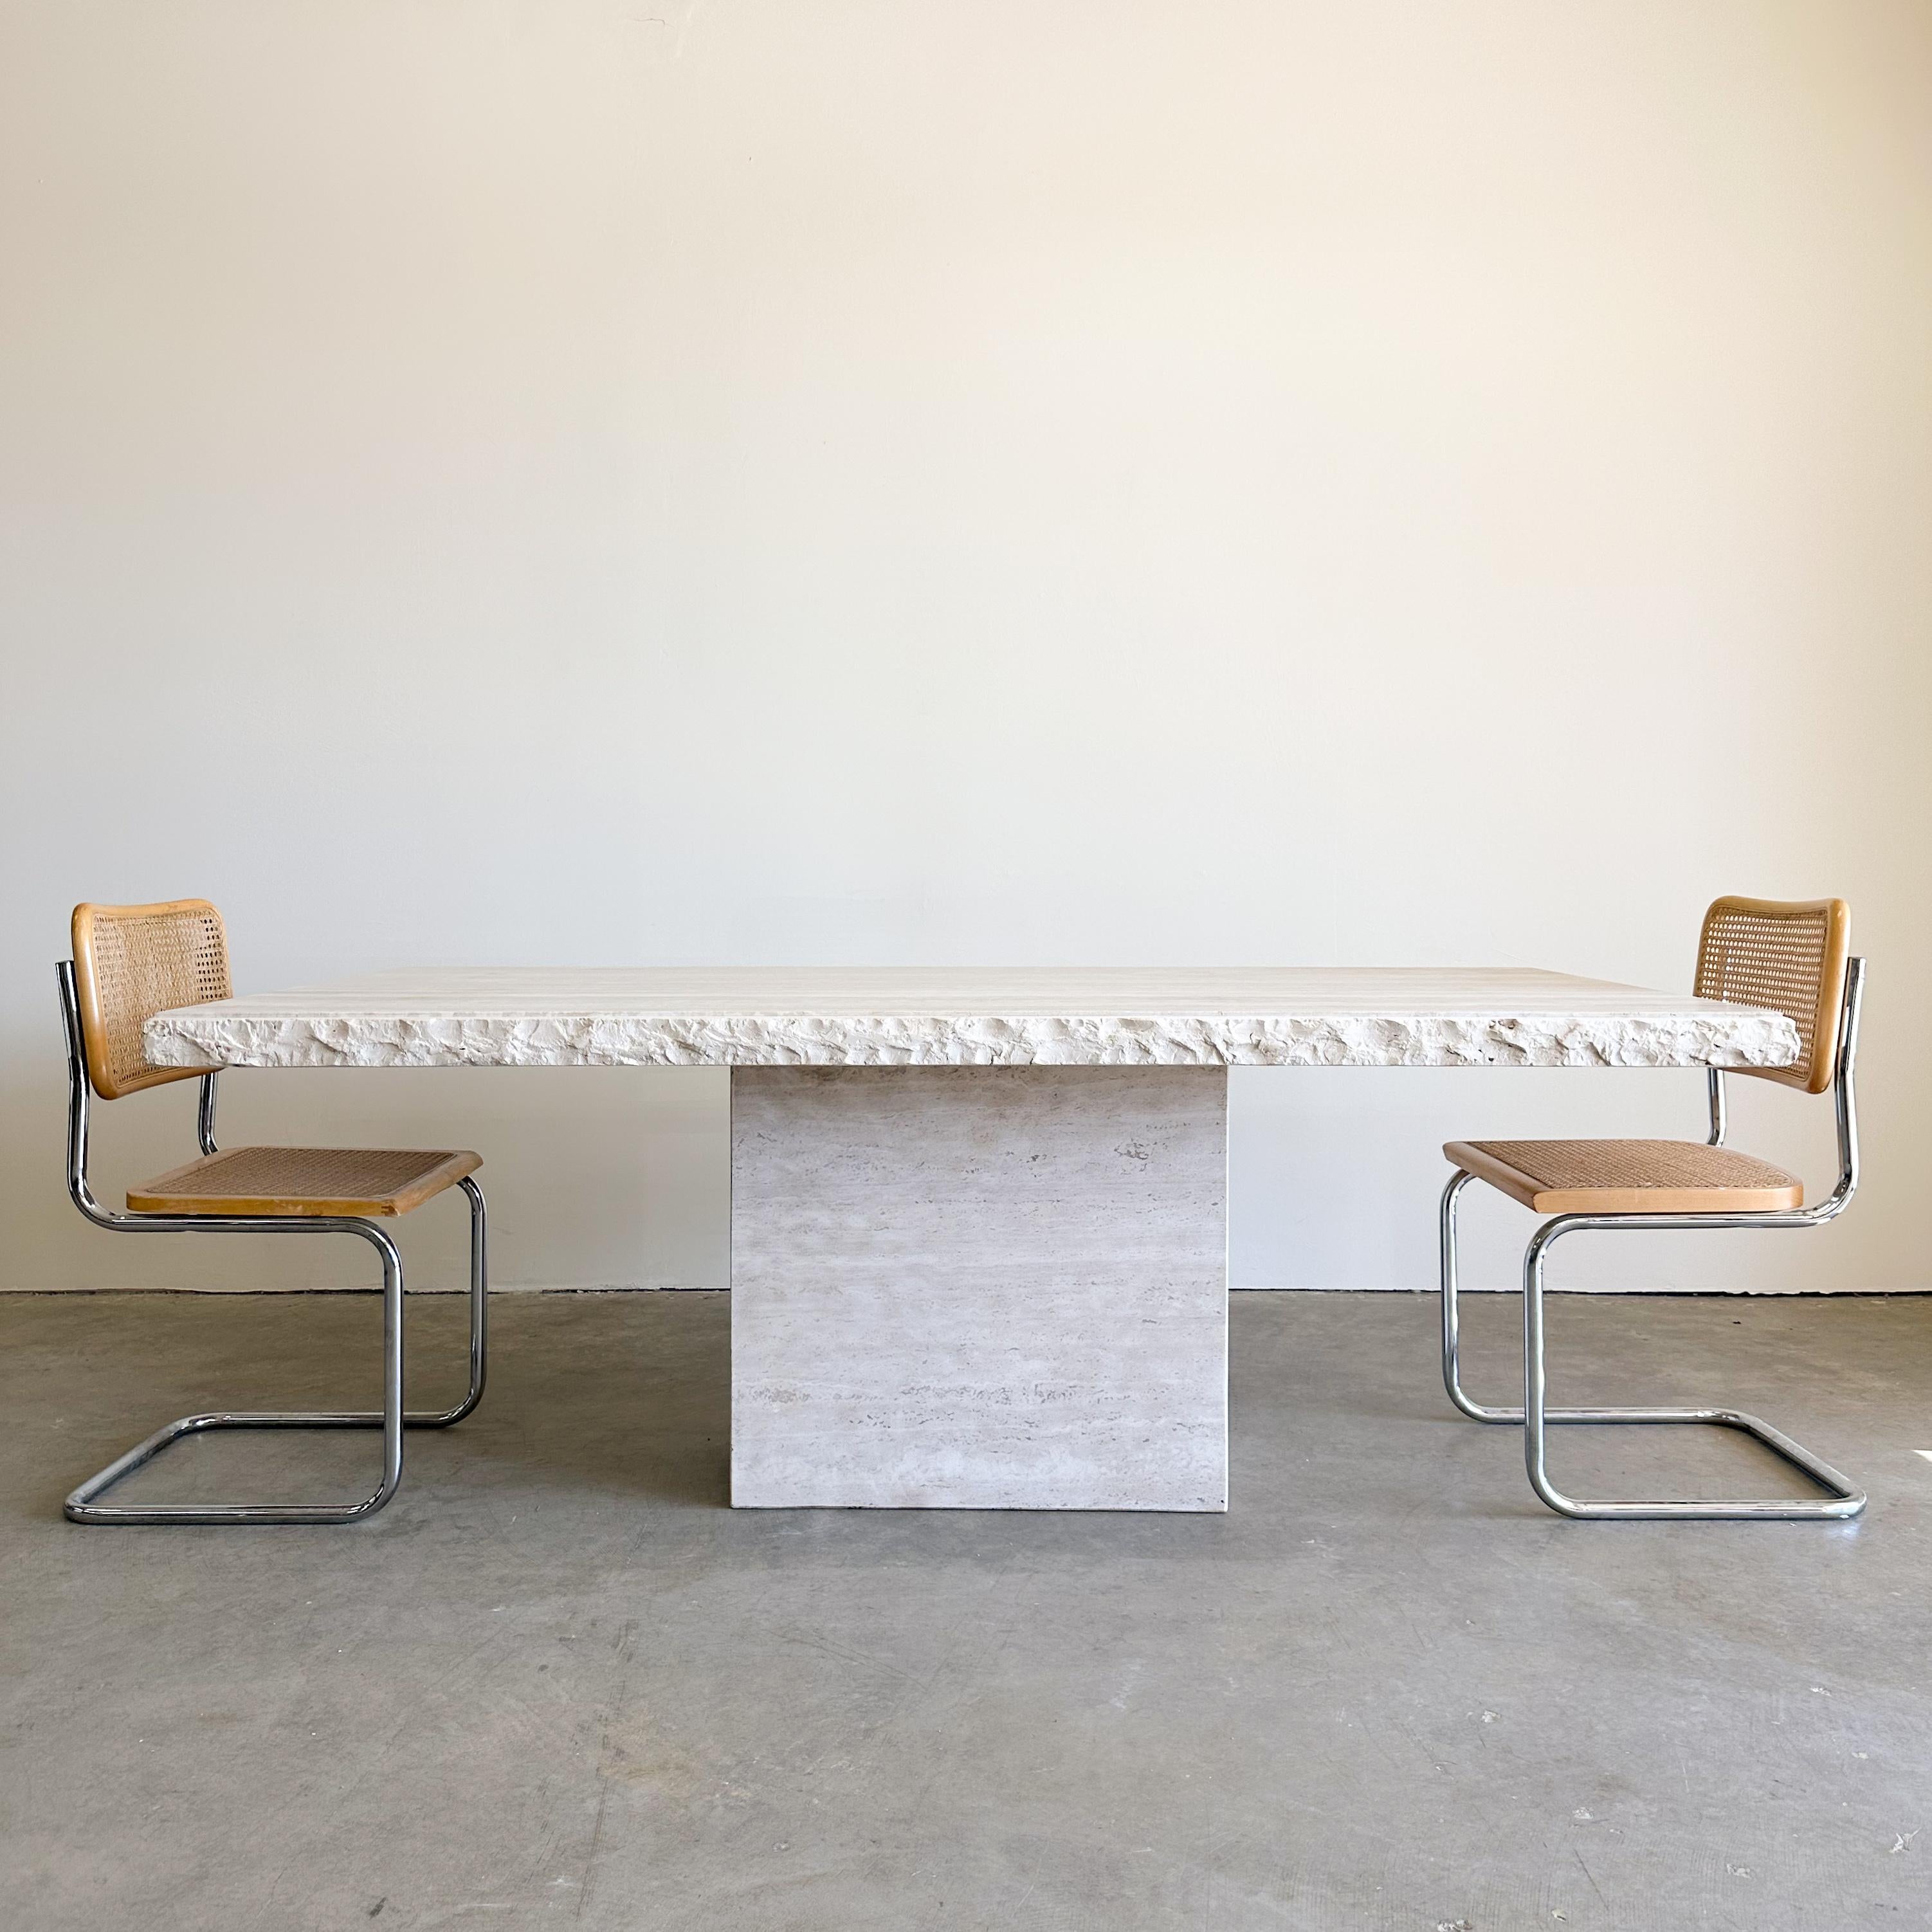 Vintage Rectangle Raw Edge/Live Edge Travertine Dining Table.

Material: The table is made from solid travertine stone, which is known for its natural and timeless appeal.

Design: It's a two-part table with a tabletop that rests on a stand. The raw